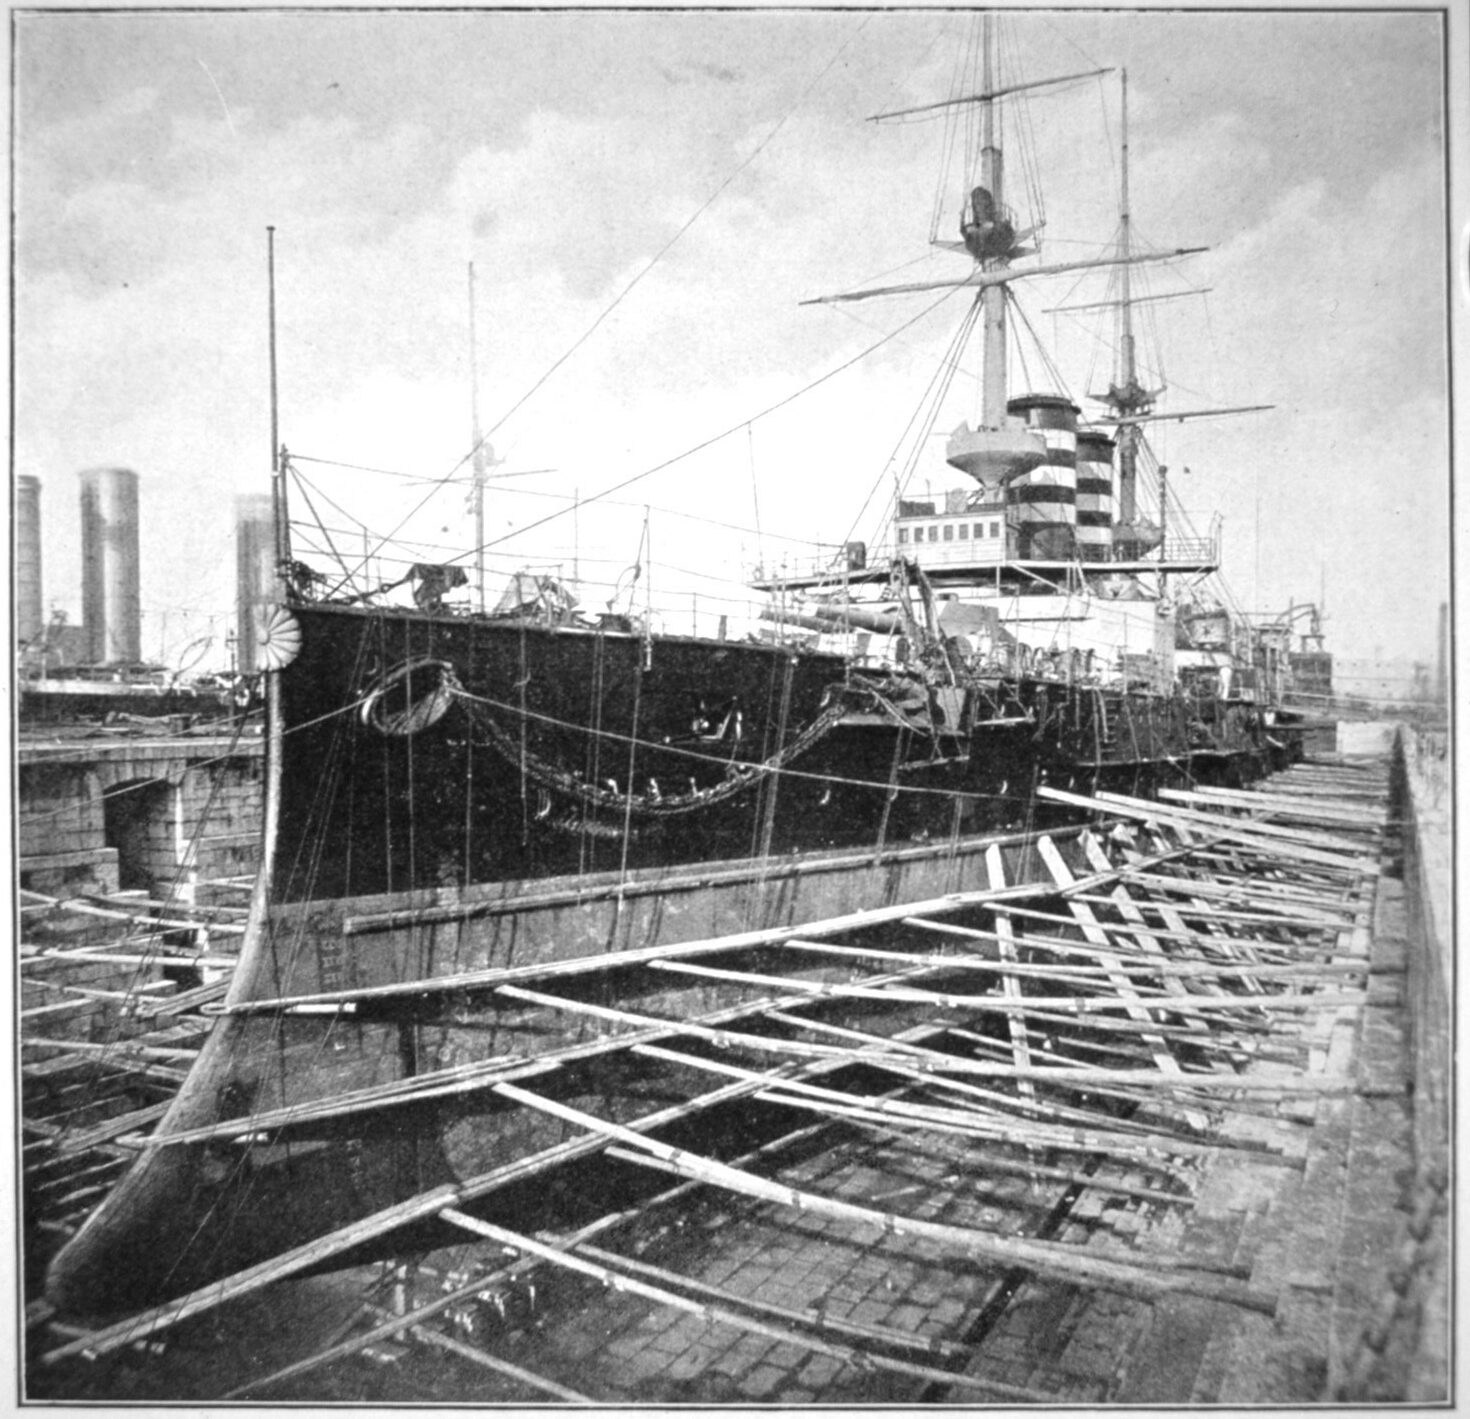 Admiral Togo’s flagship, Mikasa, was the largest ship in the Japanese Navy.